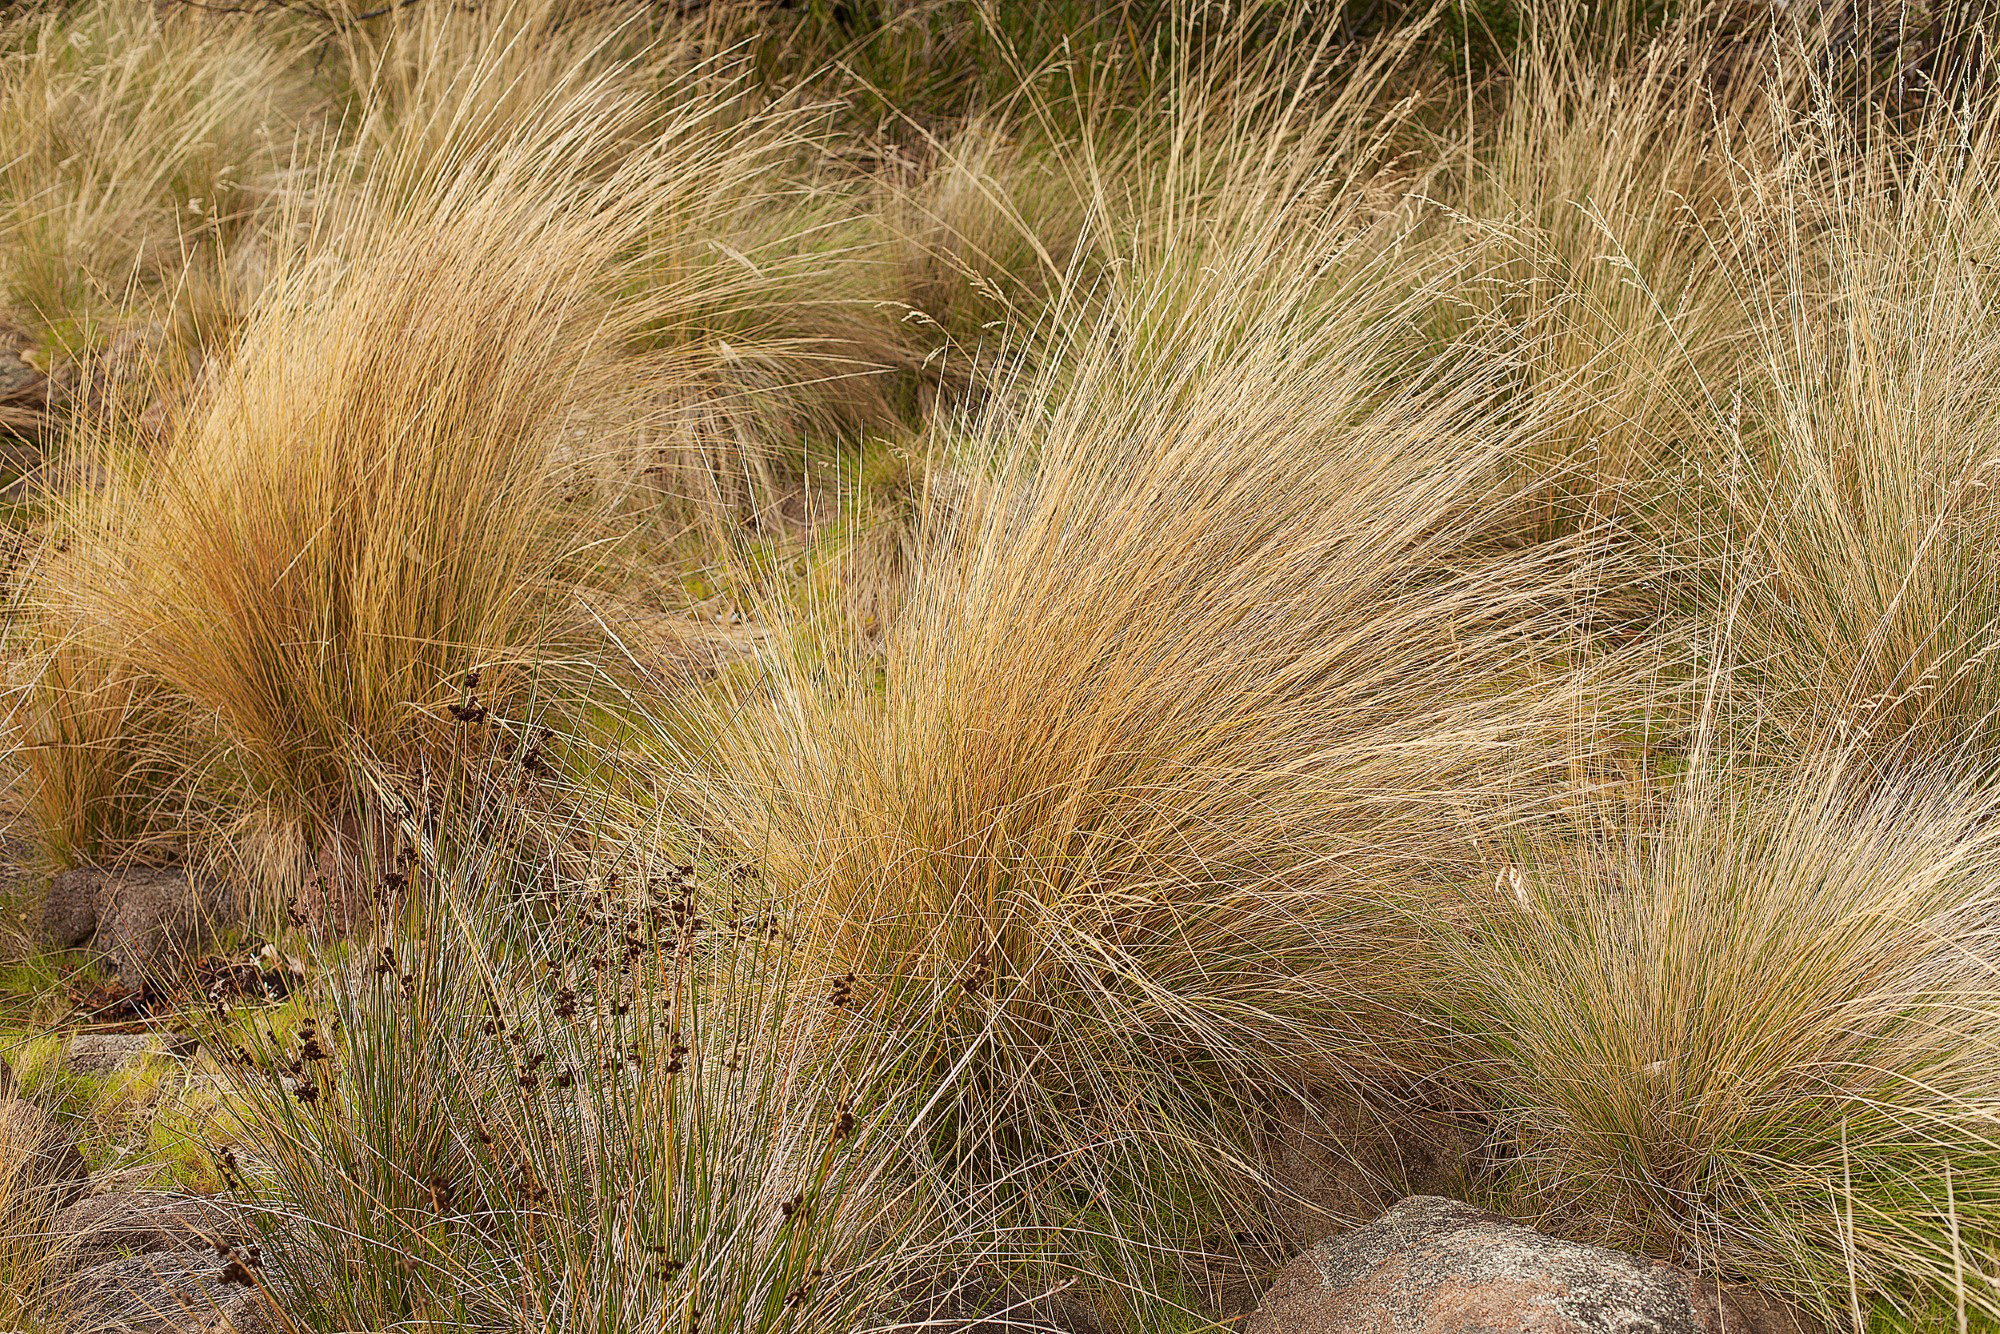 A cluster of golden tawn grass tussocks being blown gently in a brease